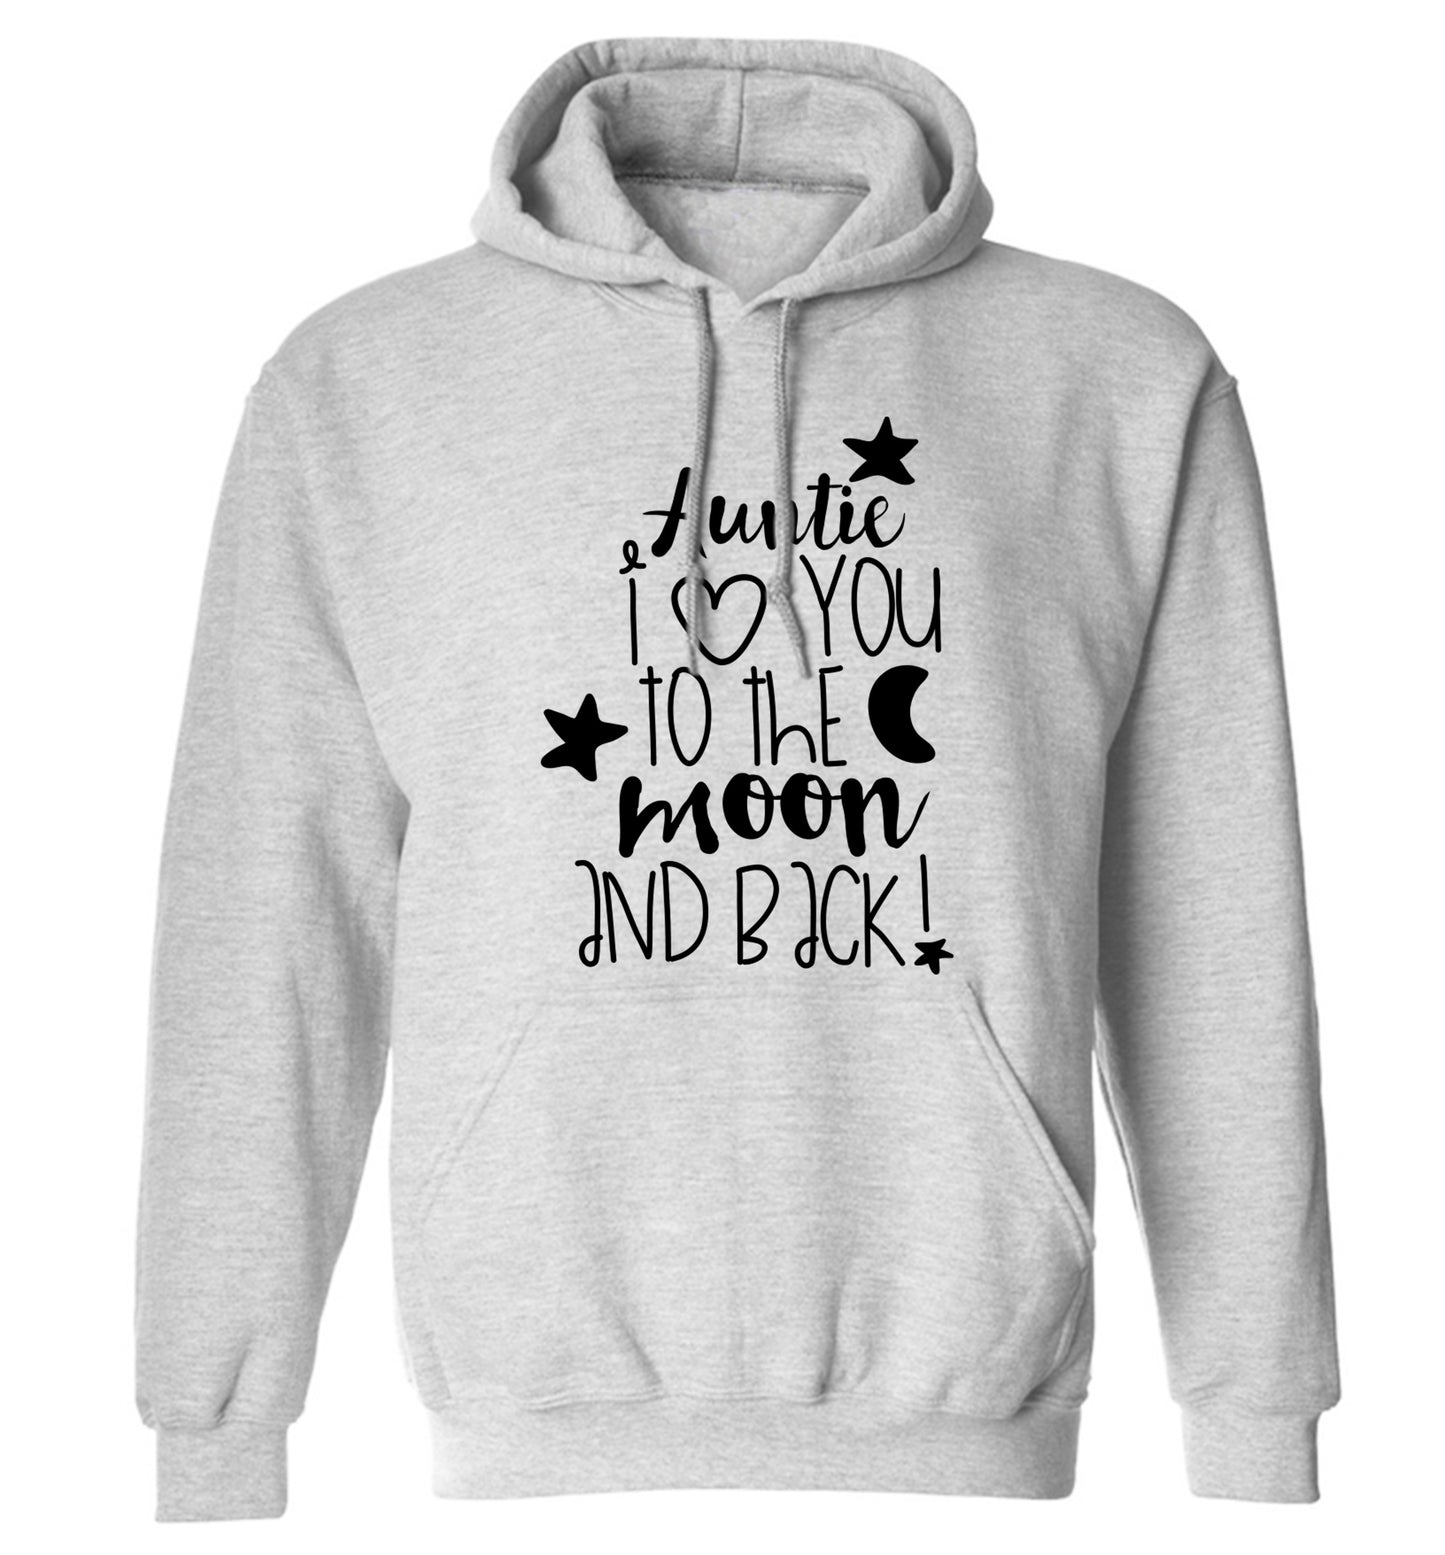 Auntie I love you to the moon and back adults unisex grey hoodie 2XL